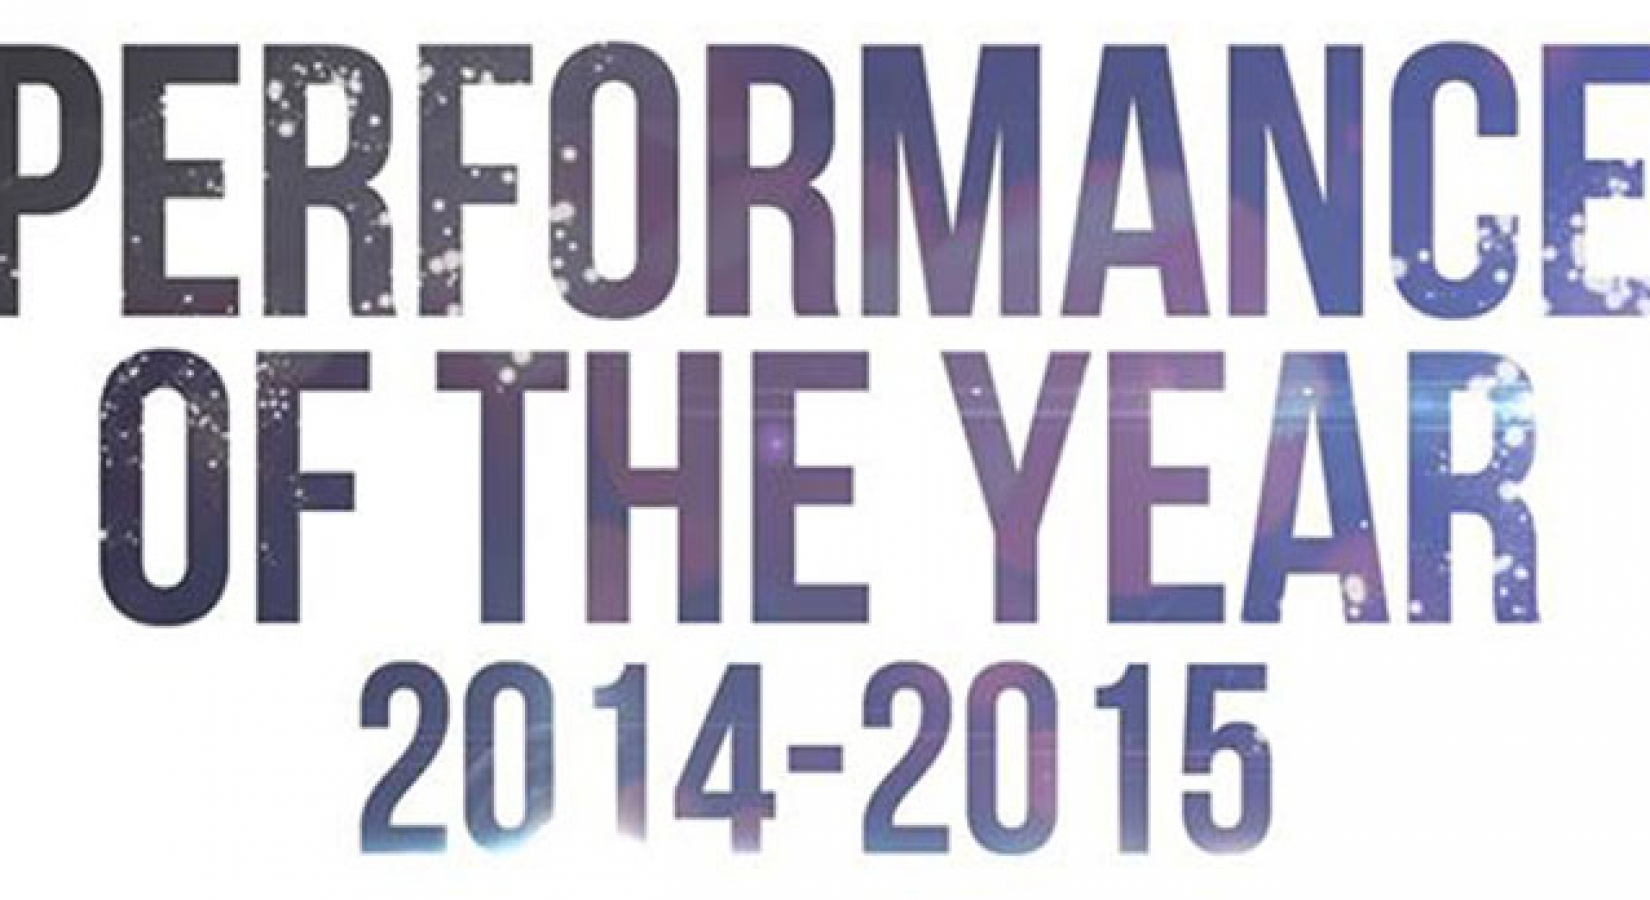 2015 Performance Of The Year . 공연순서 !!